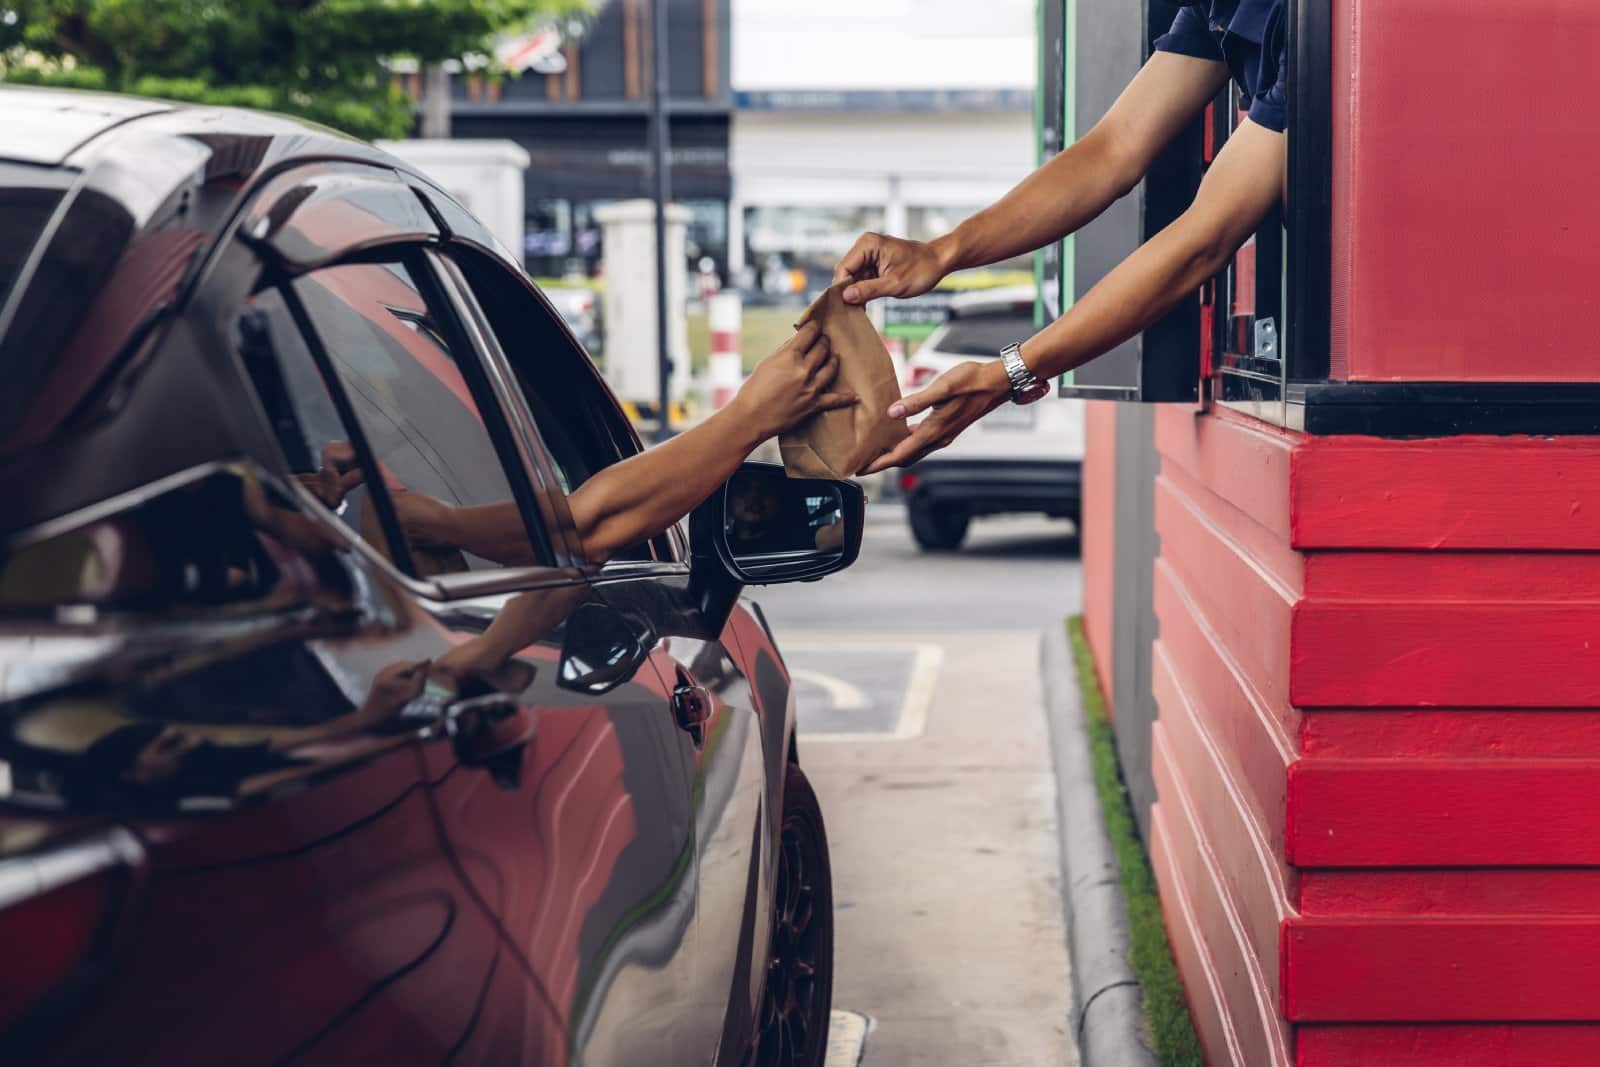 <p class="wp-caption-text">Image Credit: Shutterstock / kckate16</p>  <p><span>Ohio loves a good drive-thru, not just for food, but for coffee, banking, and even convenience stores.</span></p>